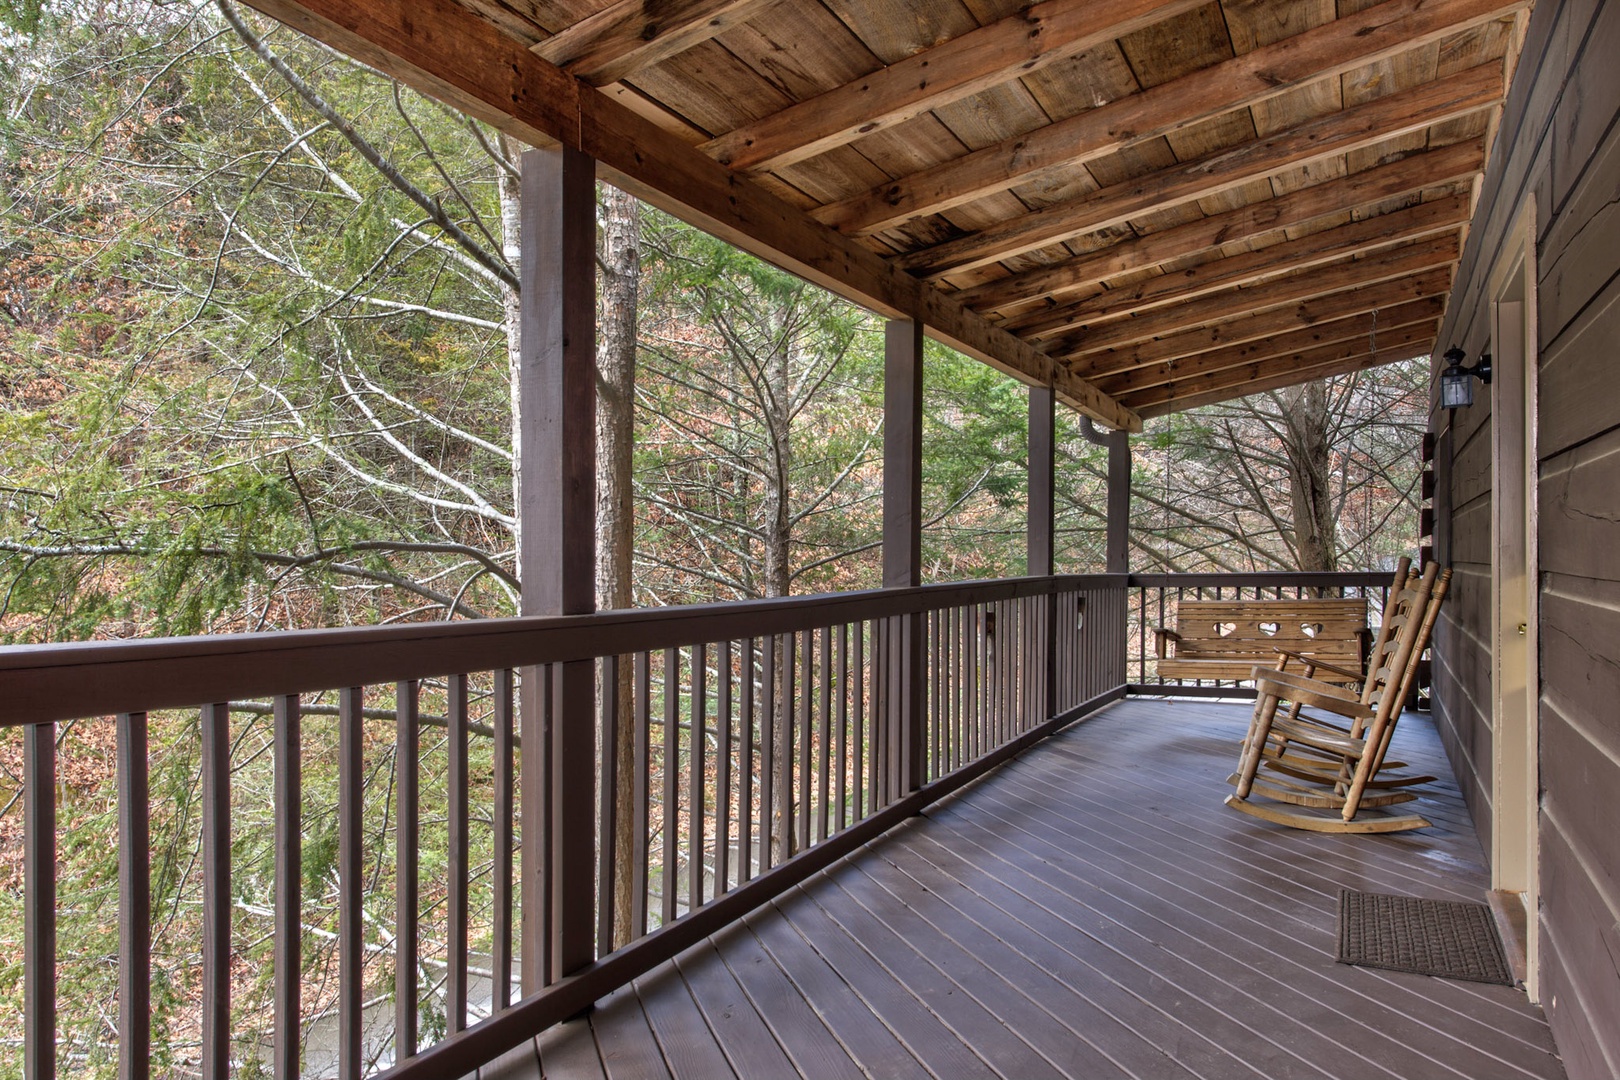 Savor coffee or an evening drink on the deck with treehouse-like views